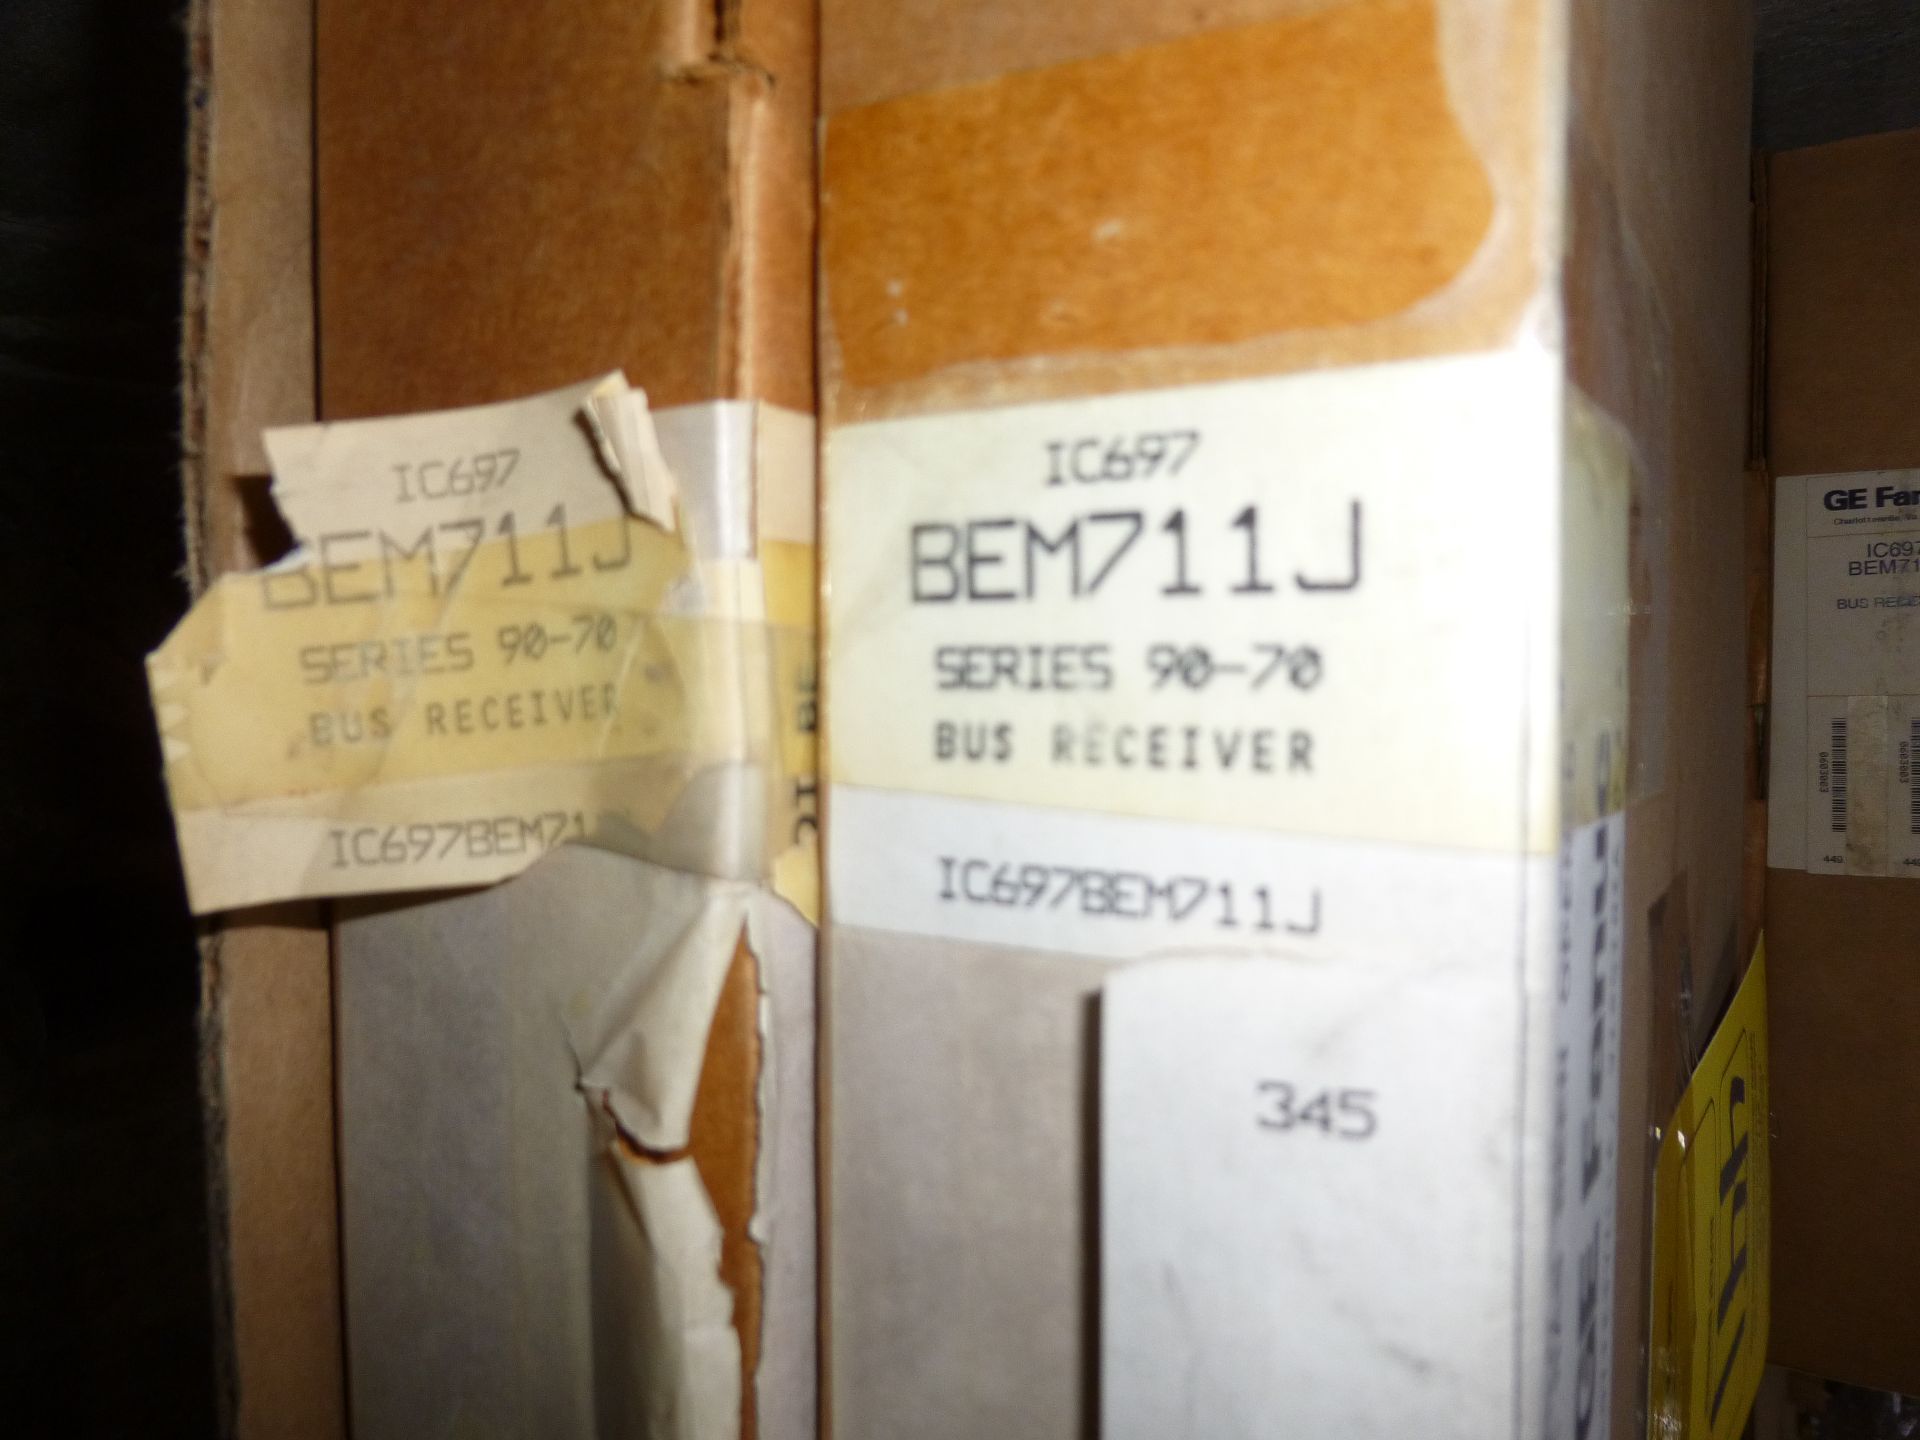 Qty 2 GE Fanuc IC697BEM711J, as always with Brolyn LLC auctions, all lots can be picked up from - Image 2 of 2